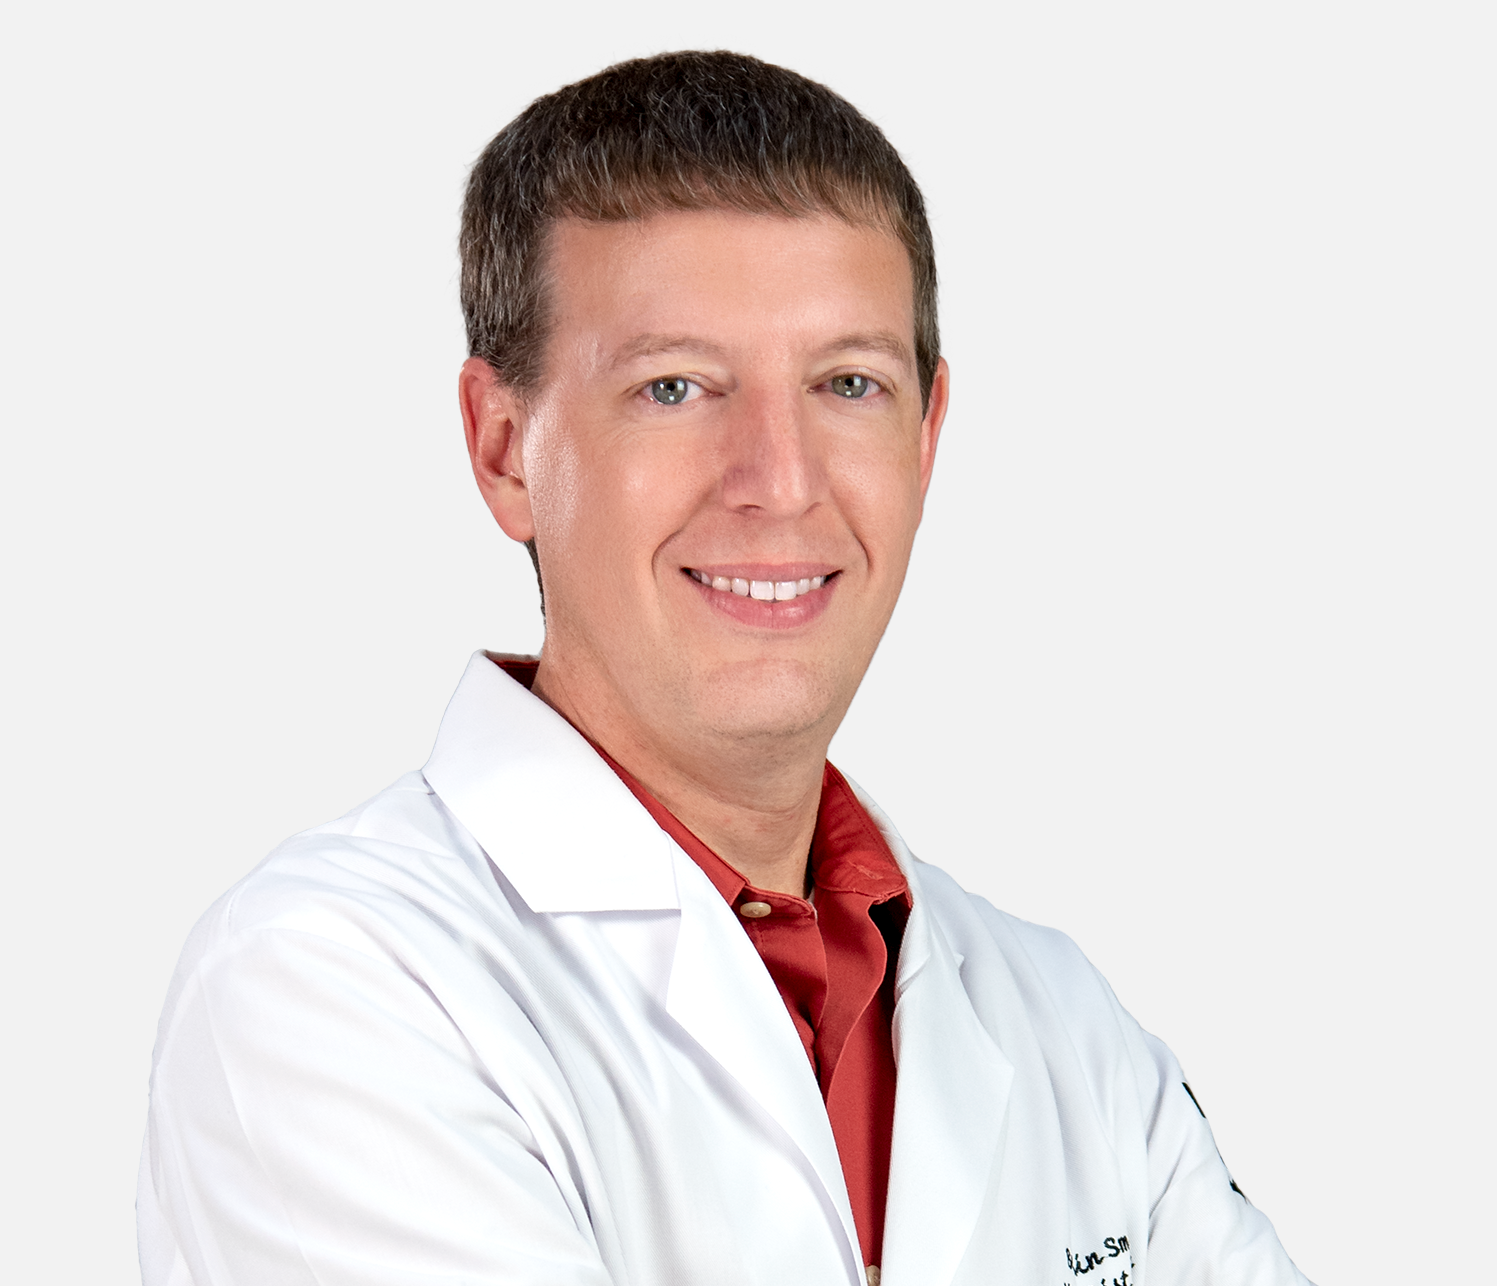 Dr. Lee's Professional Photo